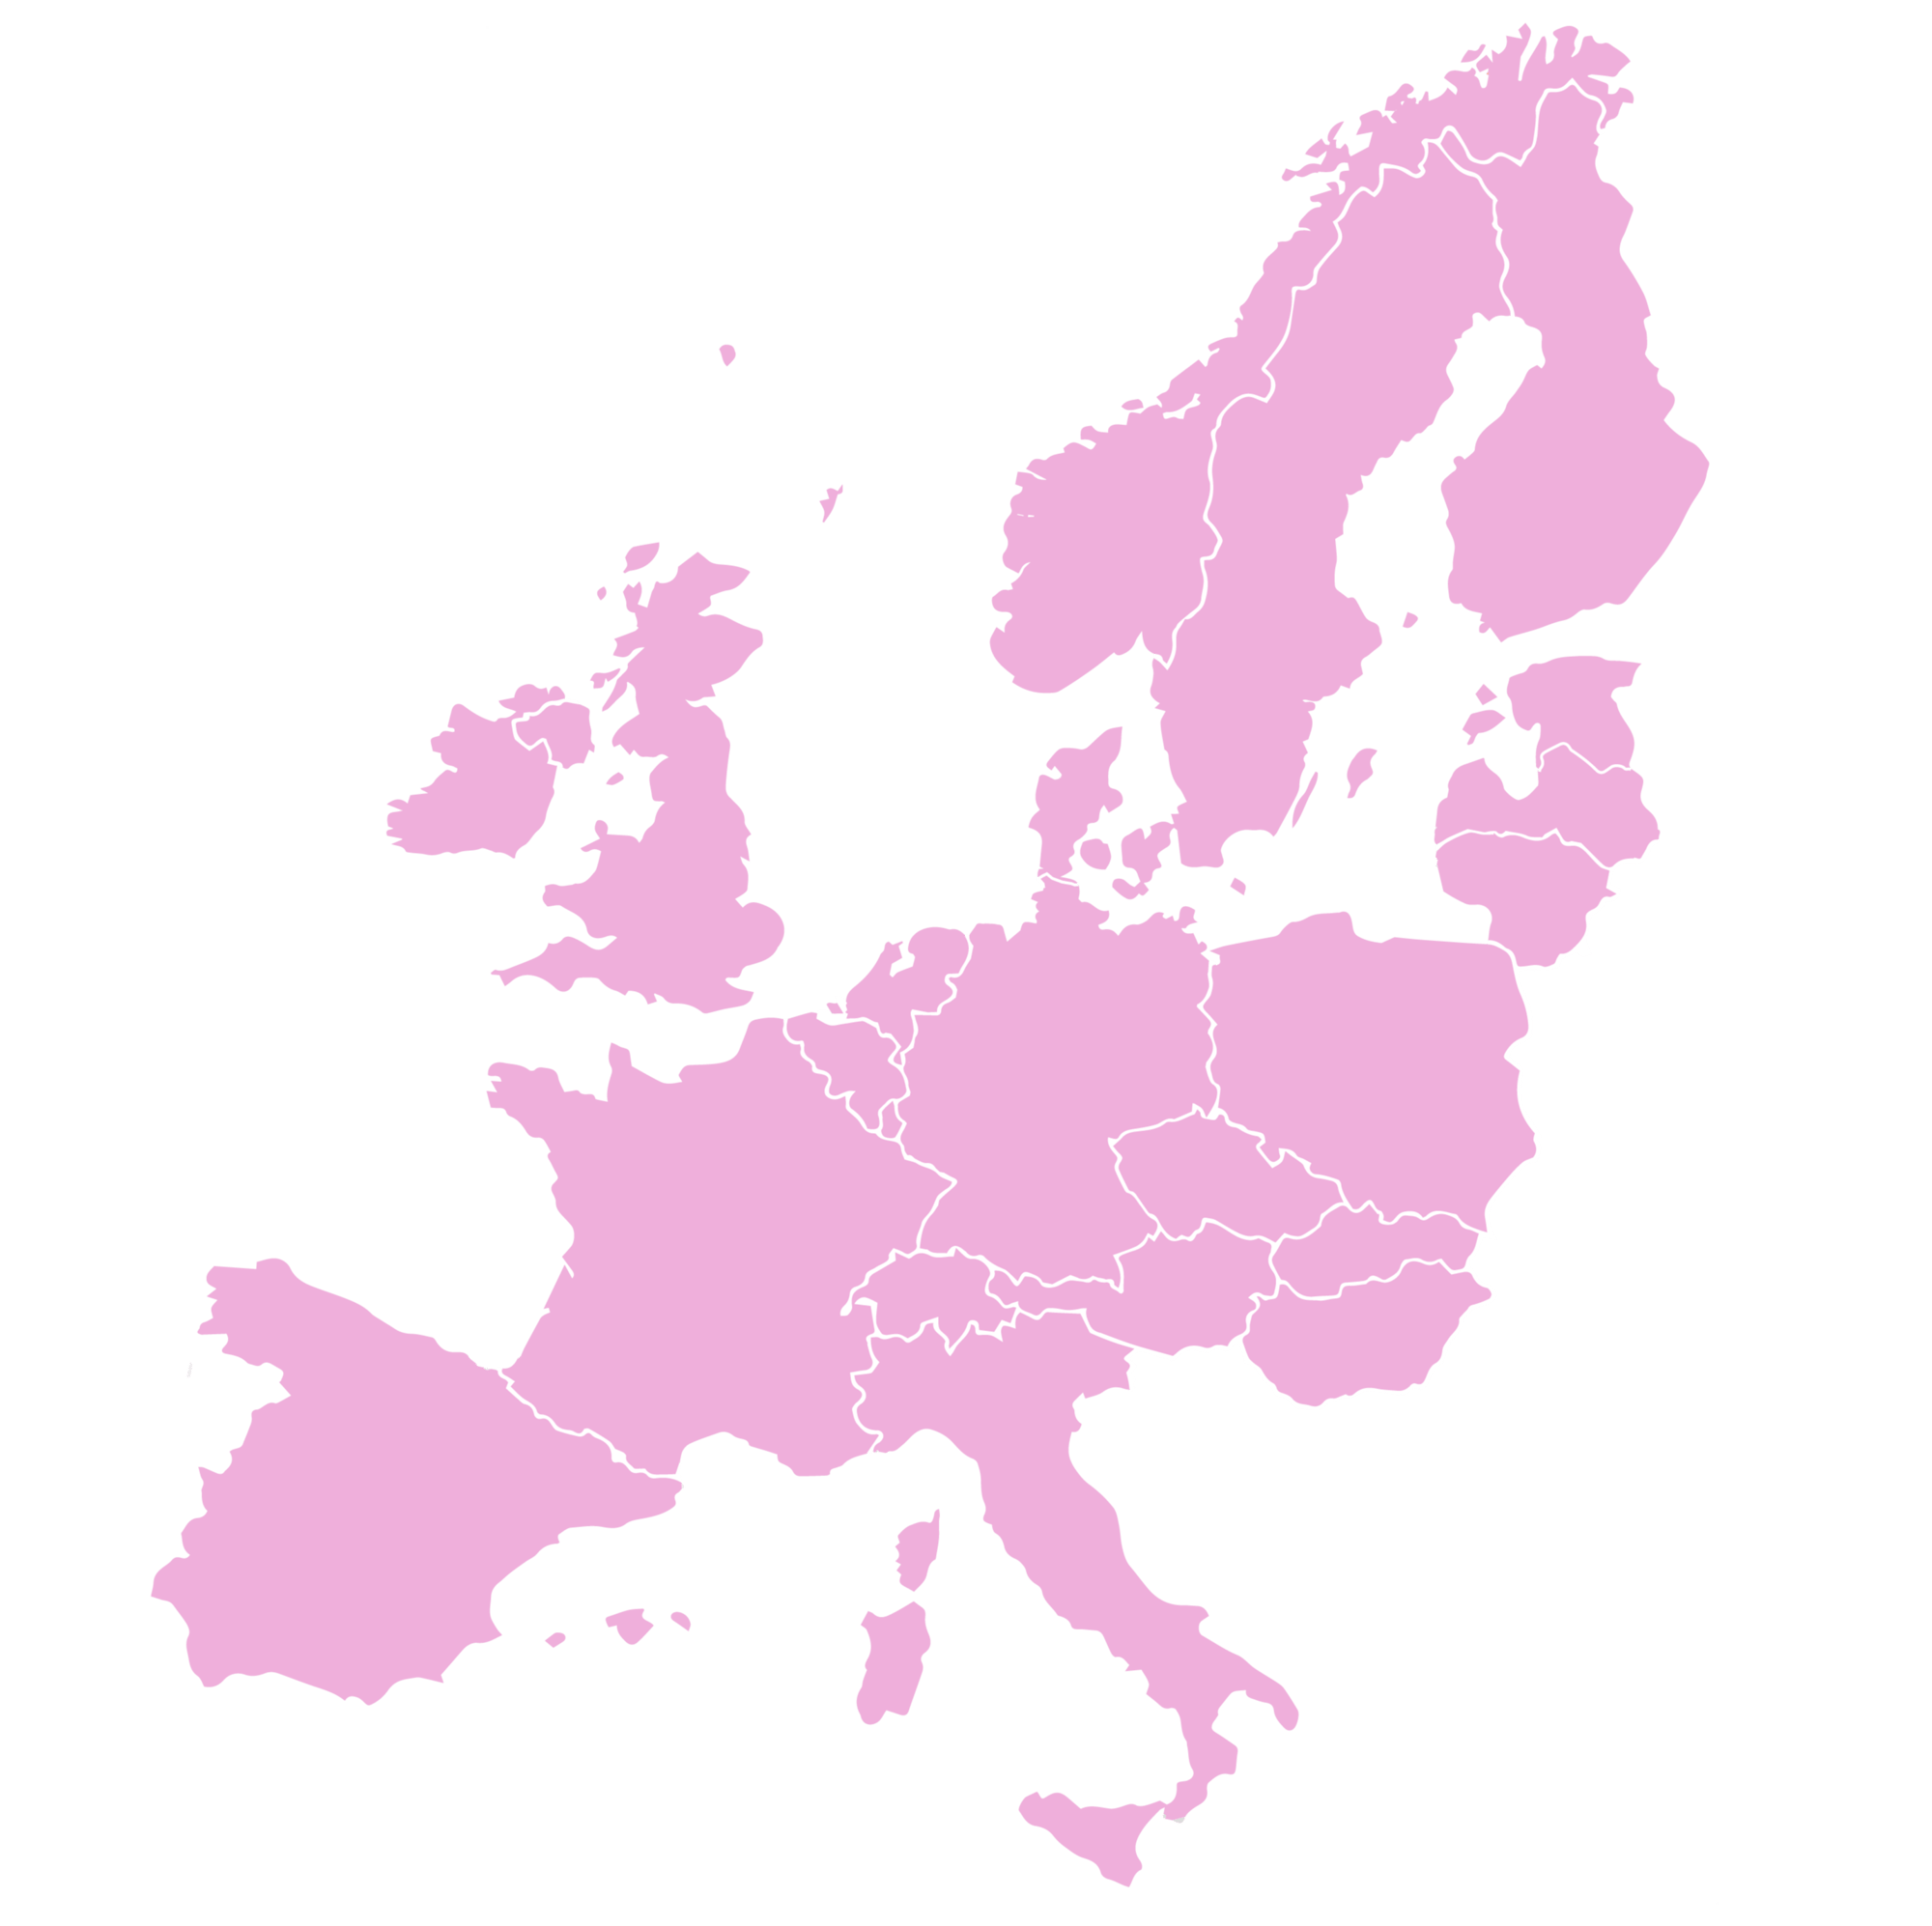 map-myl-countries-pink-05-1